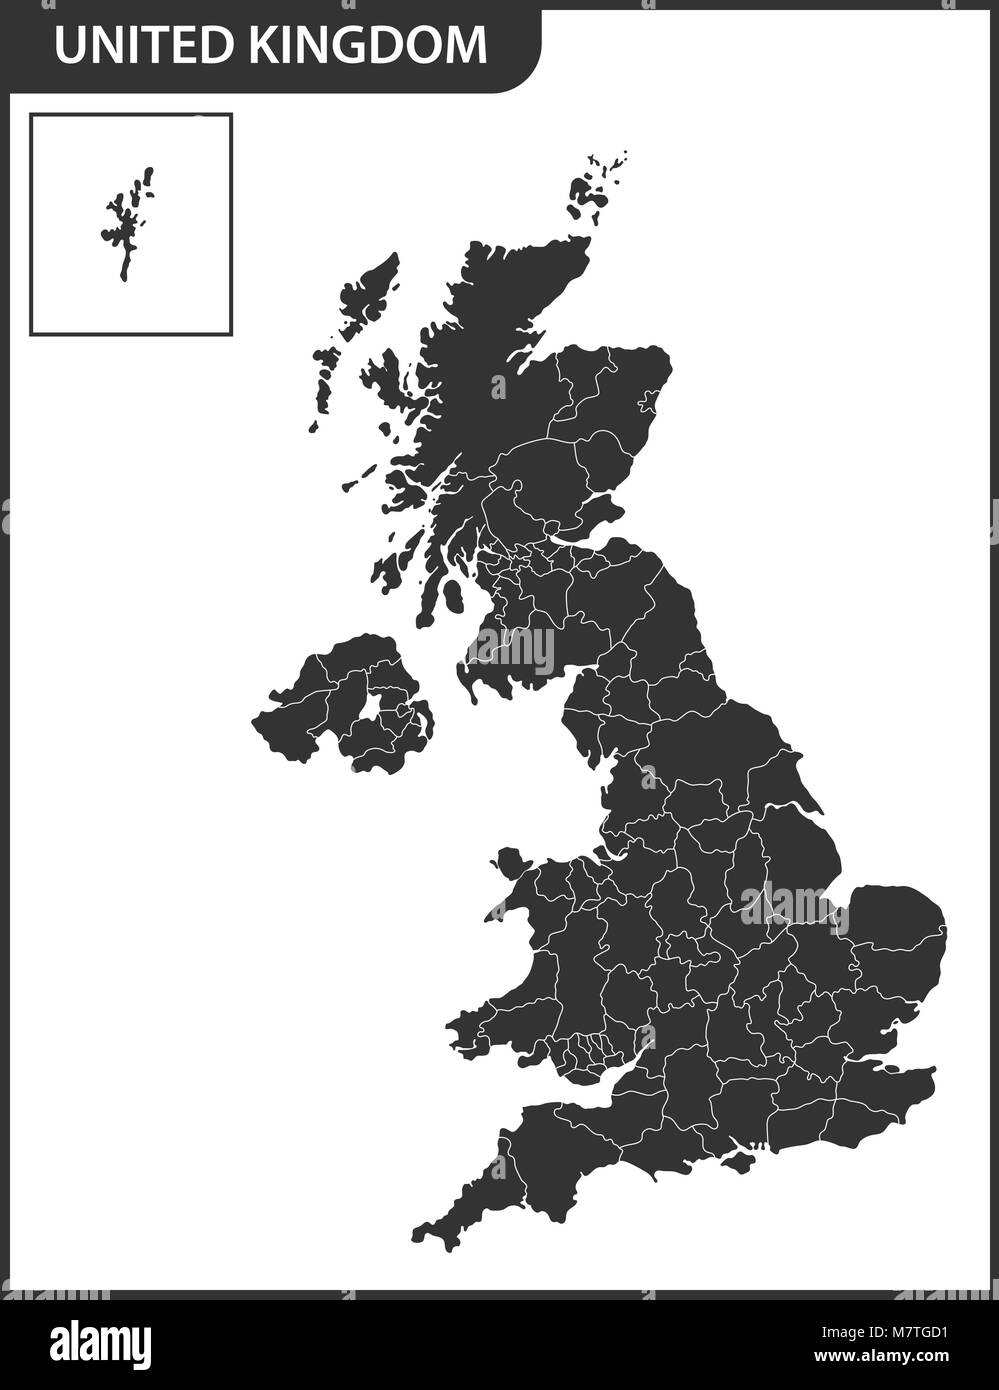 The detailed map of the United Kingdom with regions or states. Actual current relevant UK, Great Britain administrative devision. Stock Vector